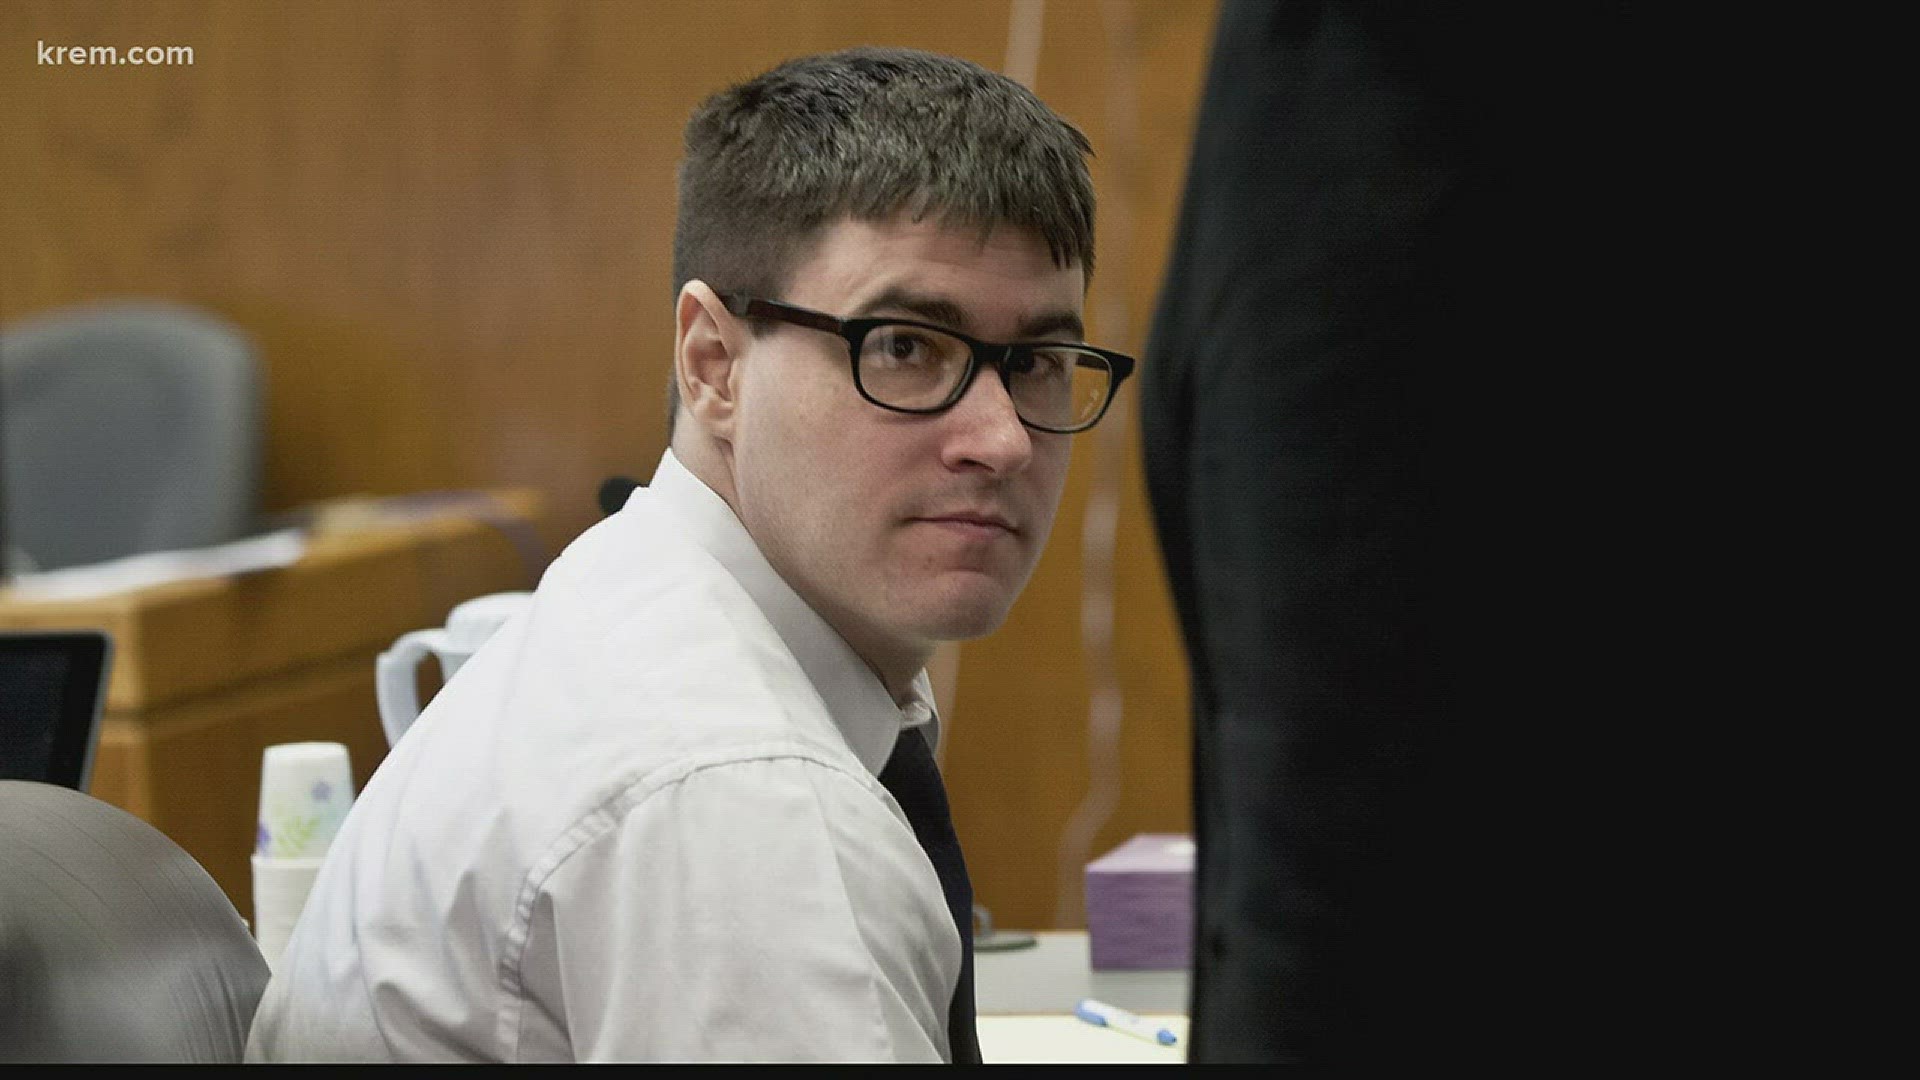 A jury has already convicted Jonathan Renfro of killing Coeur A'lene Police Sergeant last month... Now they're deciding if he'll get the death penalty.